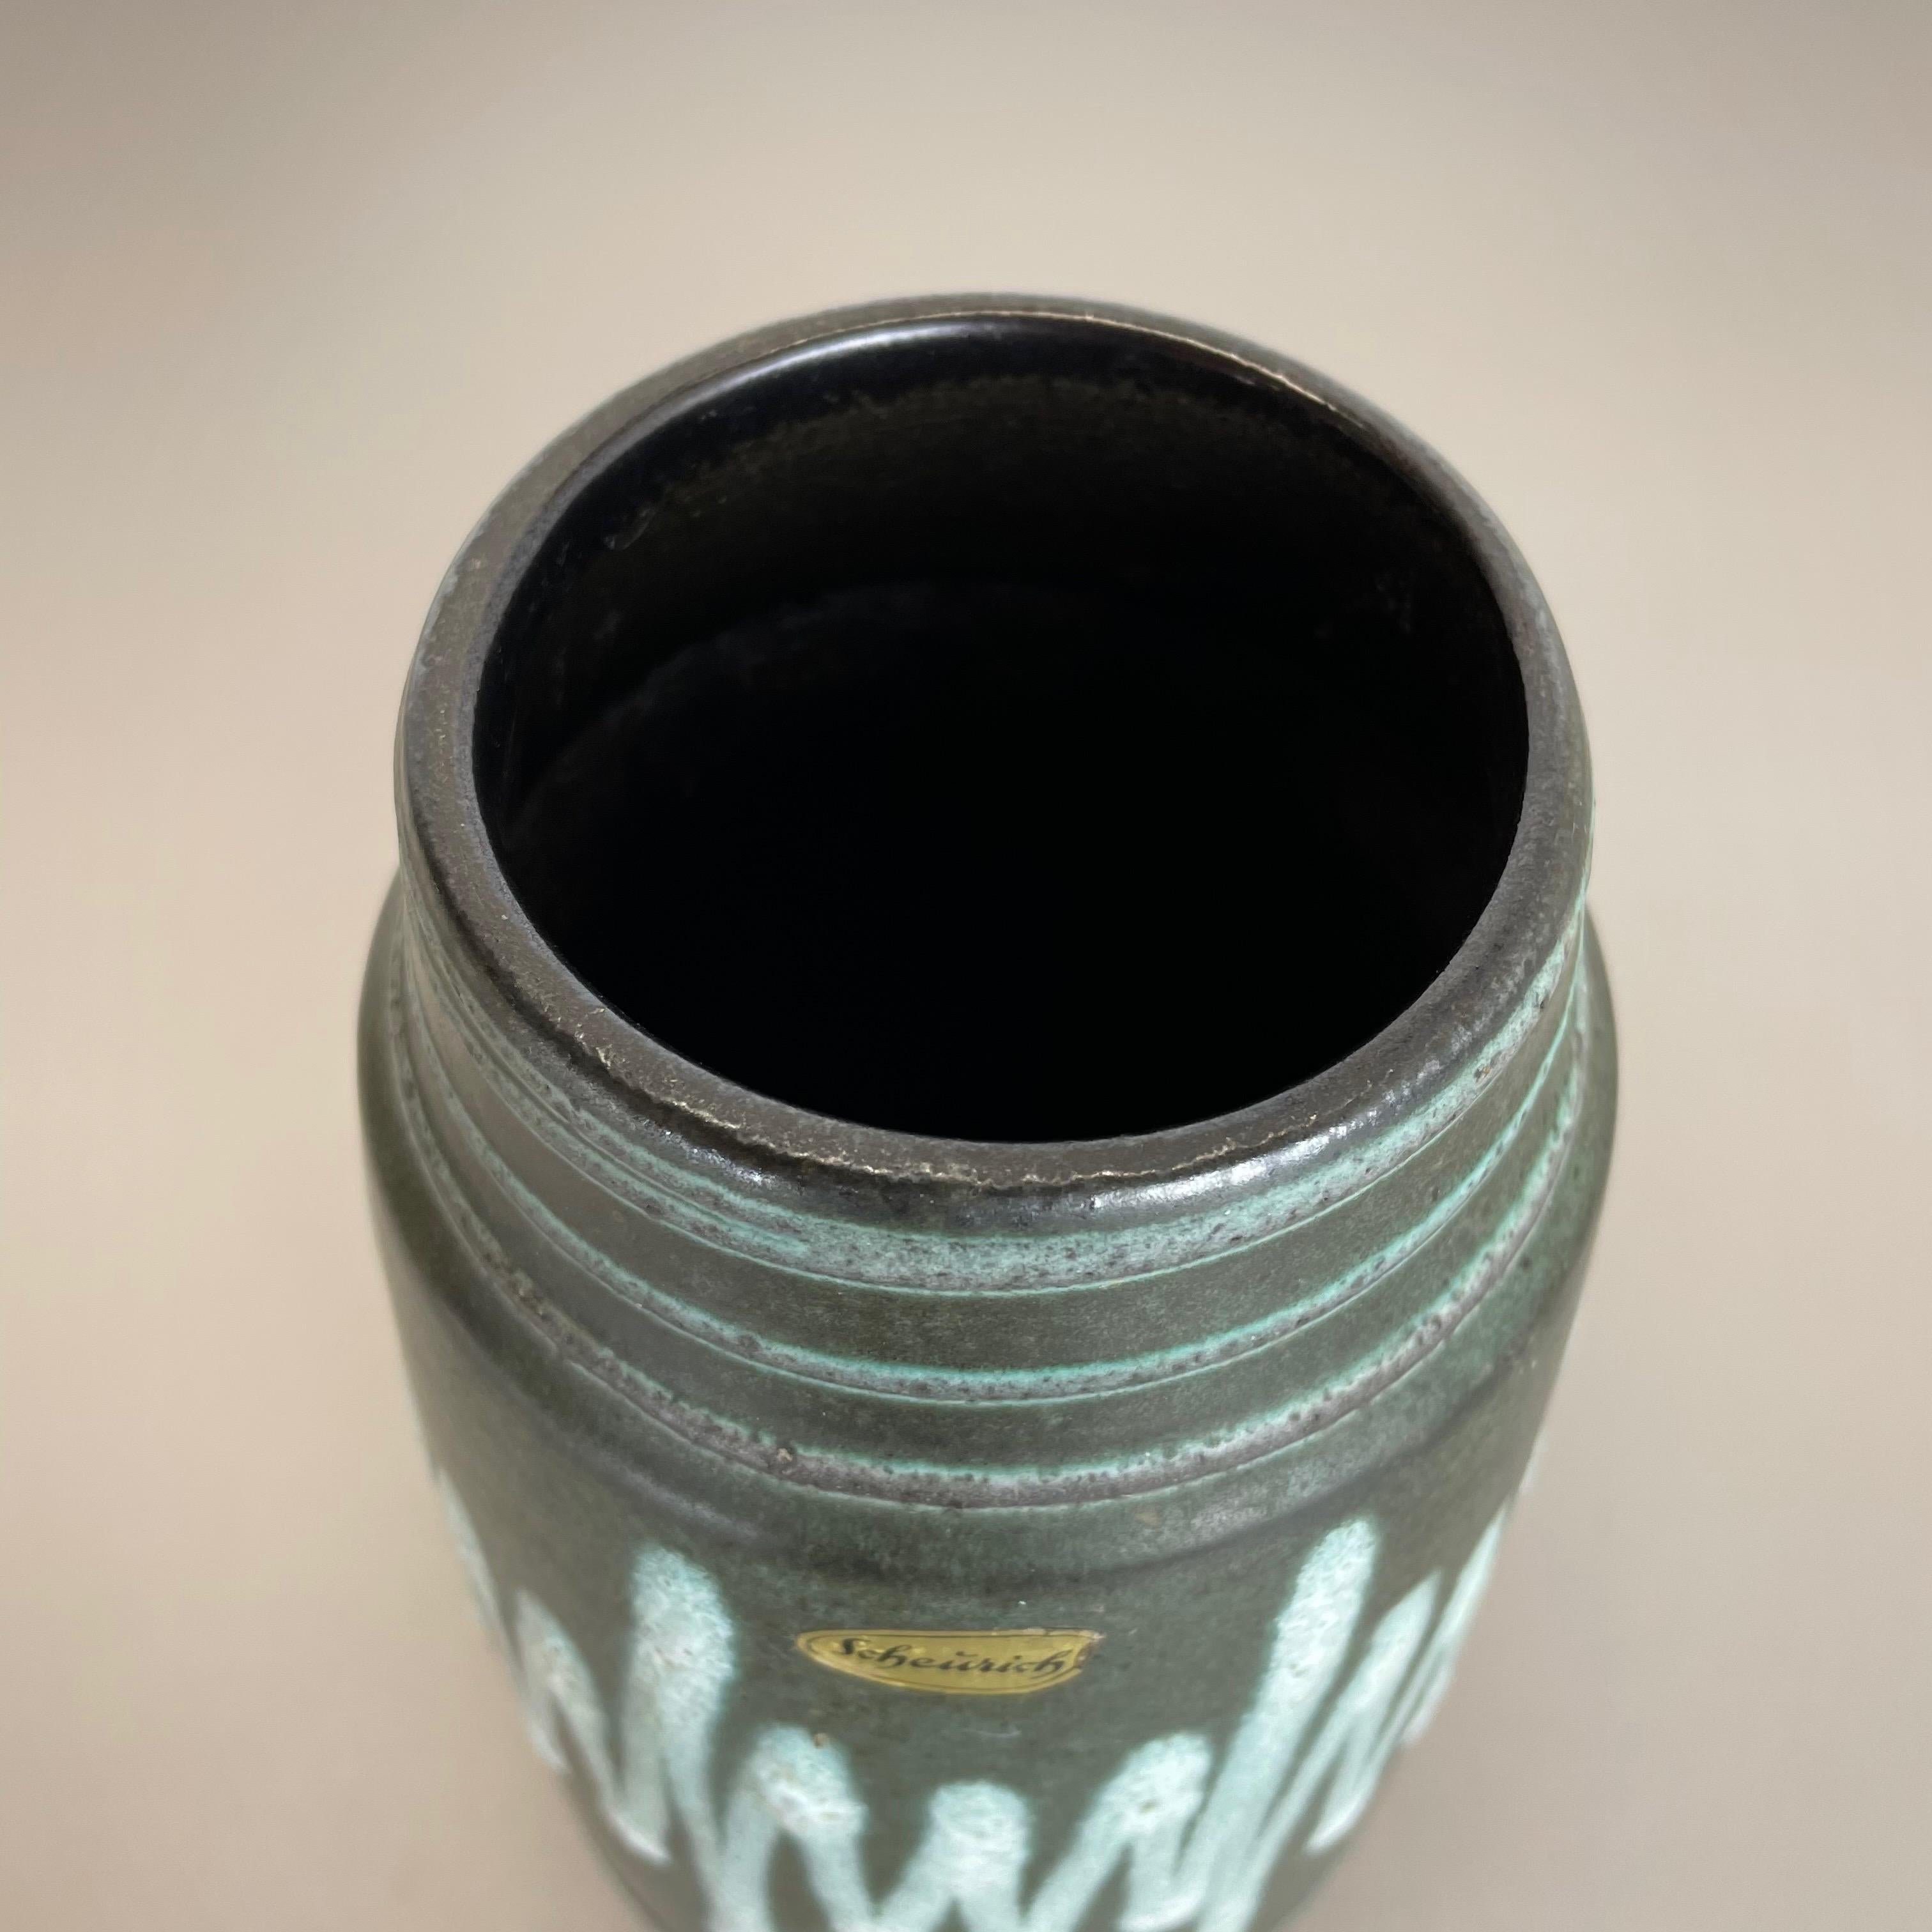 Extraordinary Zig Zag Pottery Fat Lava Vase Made by Scheurich, Germany, 1970s For Sale 2